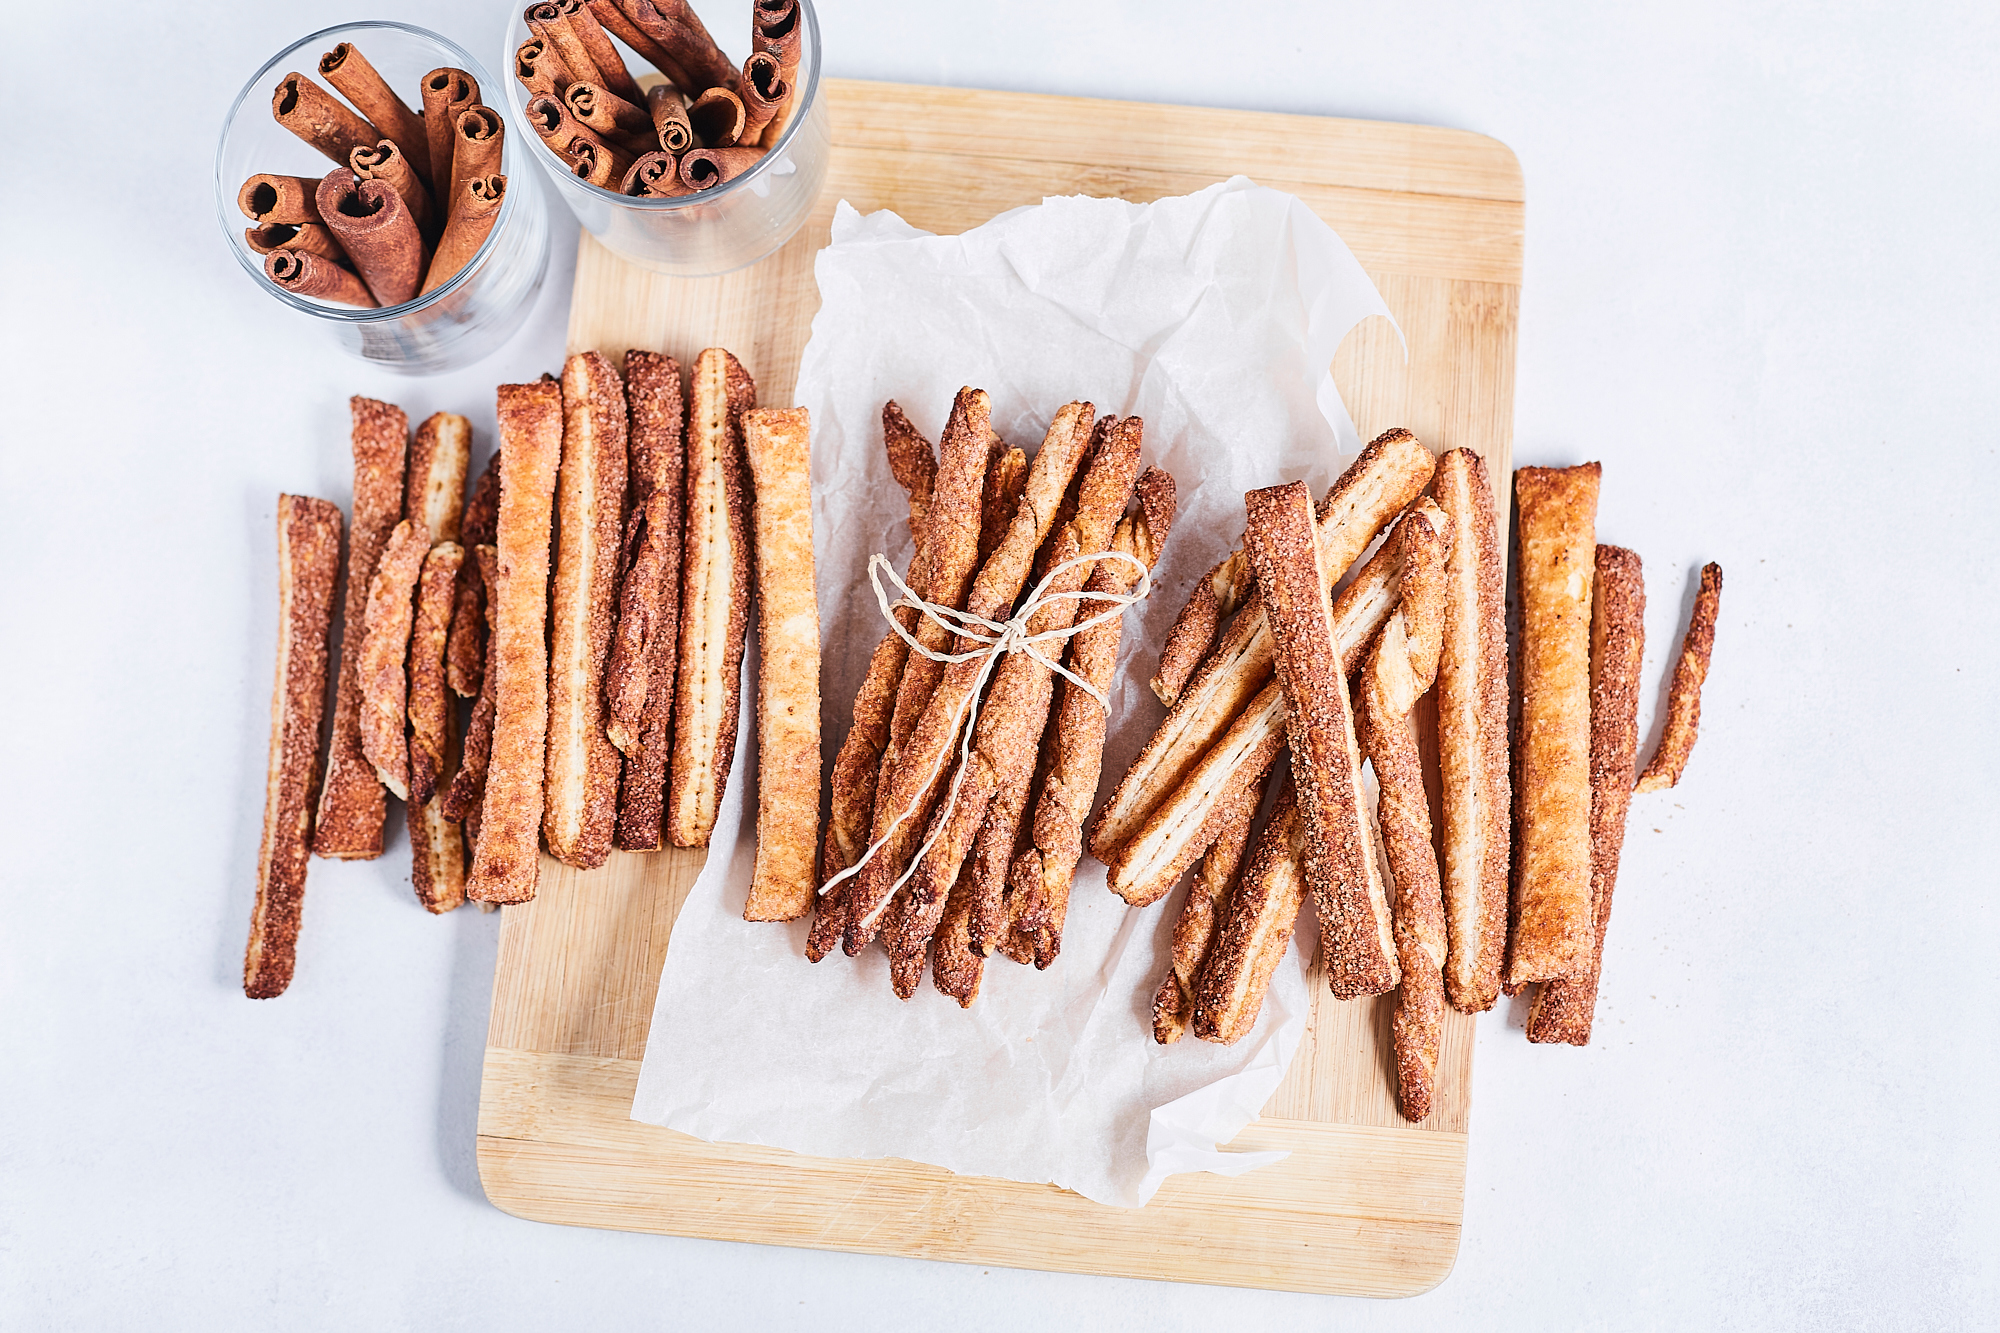 Puff pastry twists with cinnamon